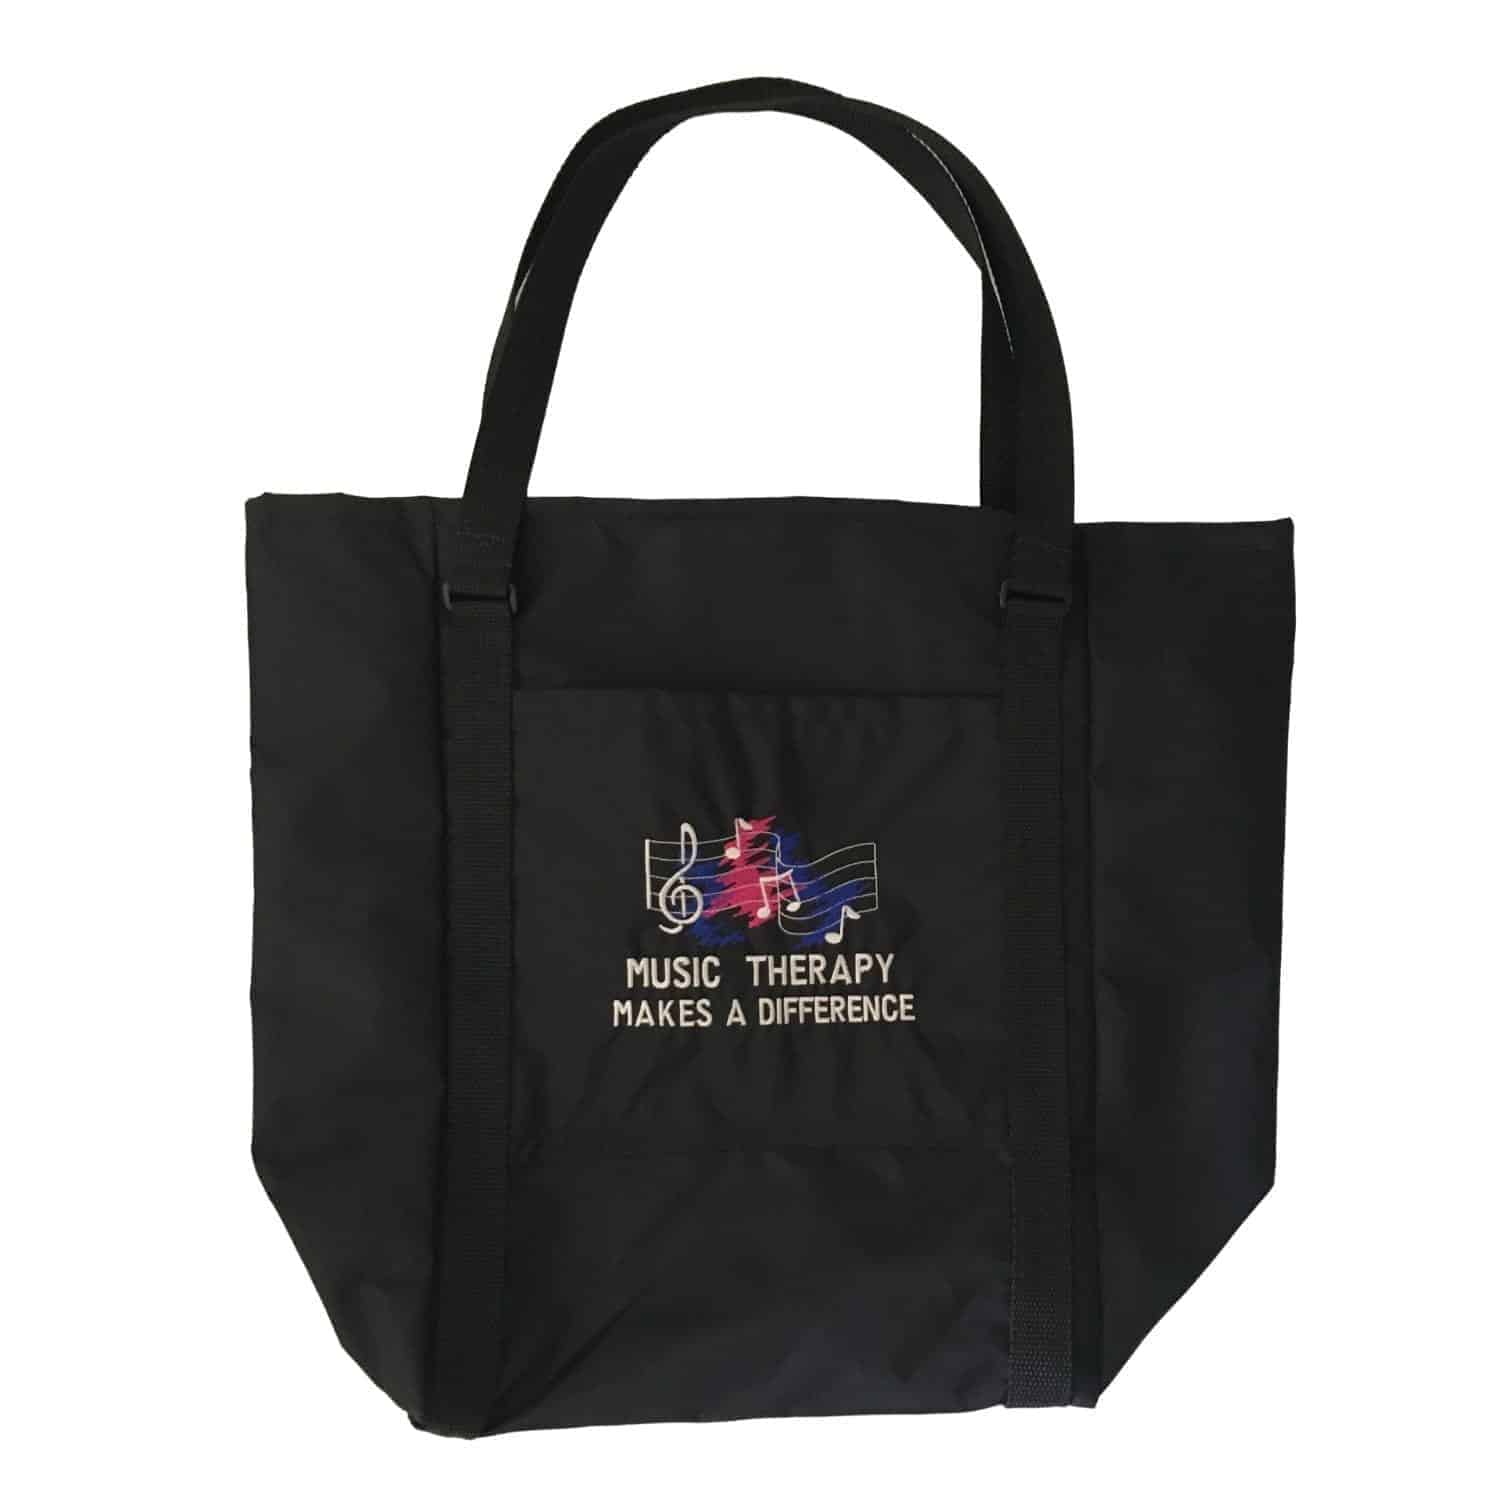 Bags and Totes For Organizing Music Movement Products Instruments